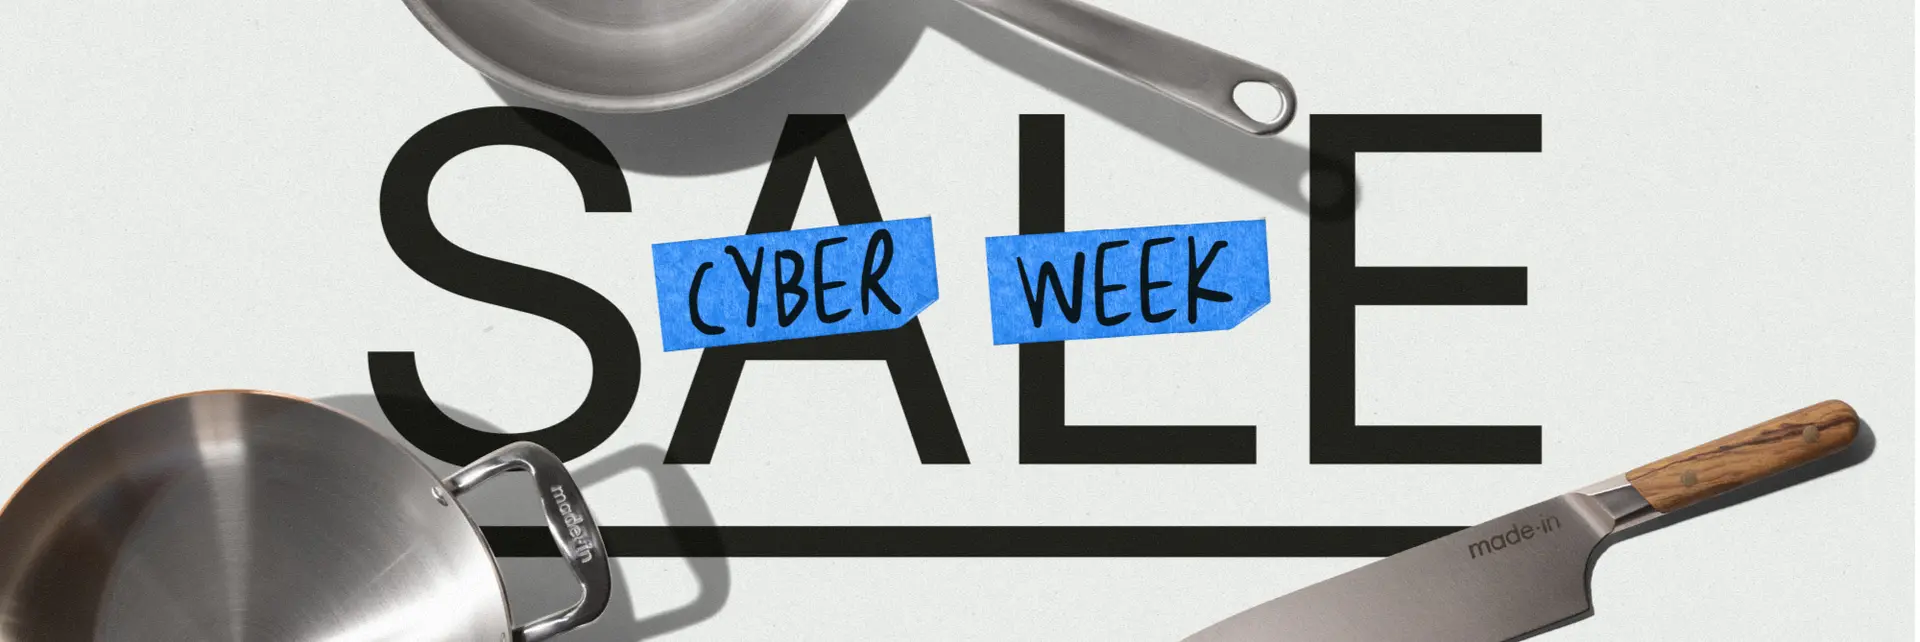 A promotional graphic for a "Cyber Week Sale" featuring an array of cookware including frying pans.